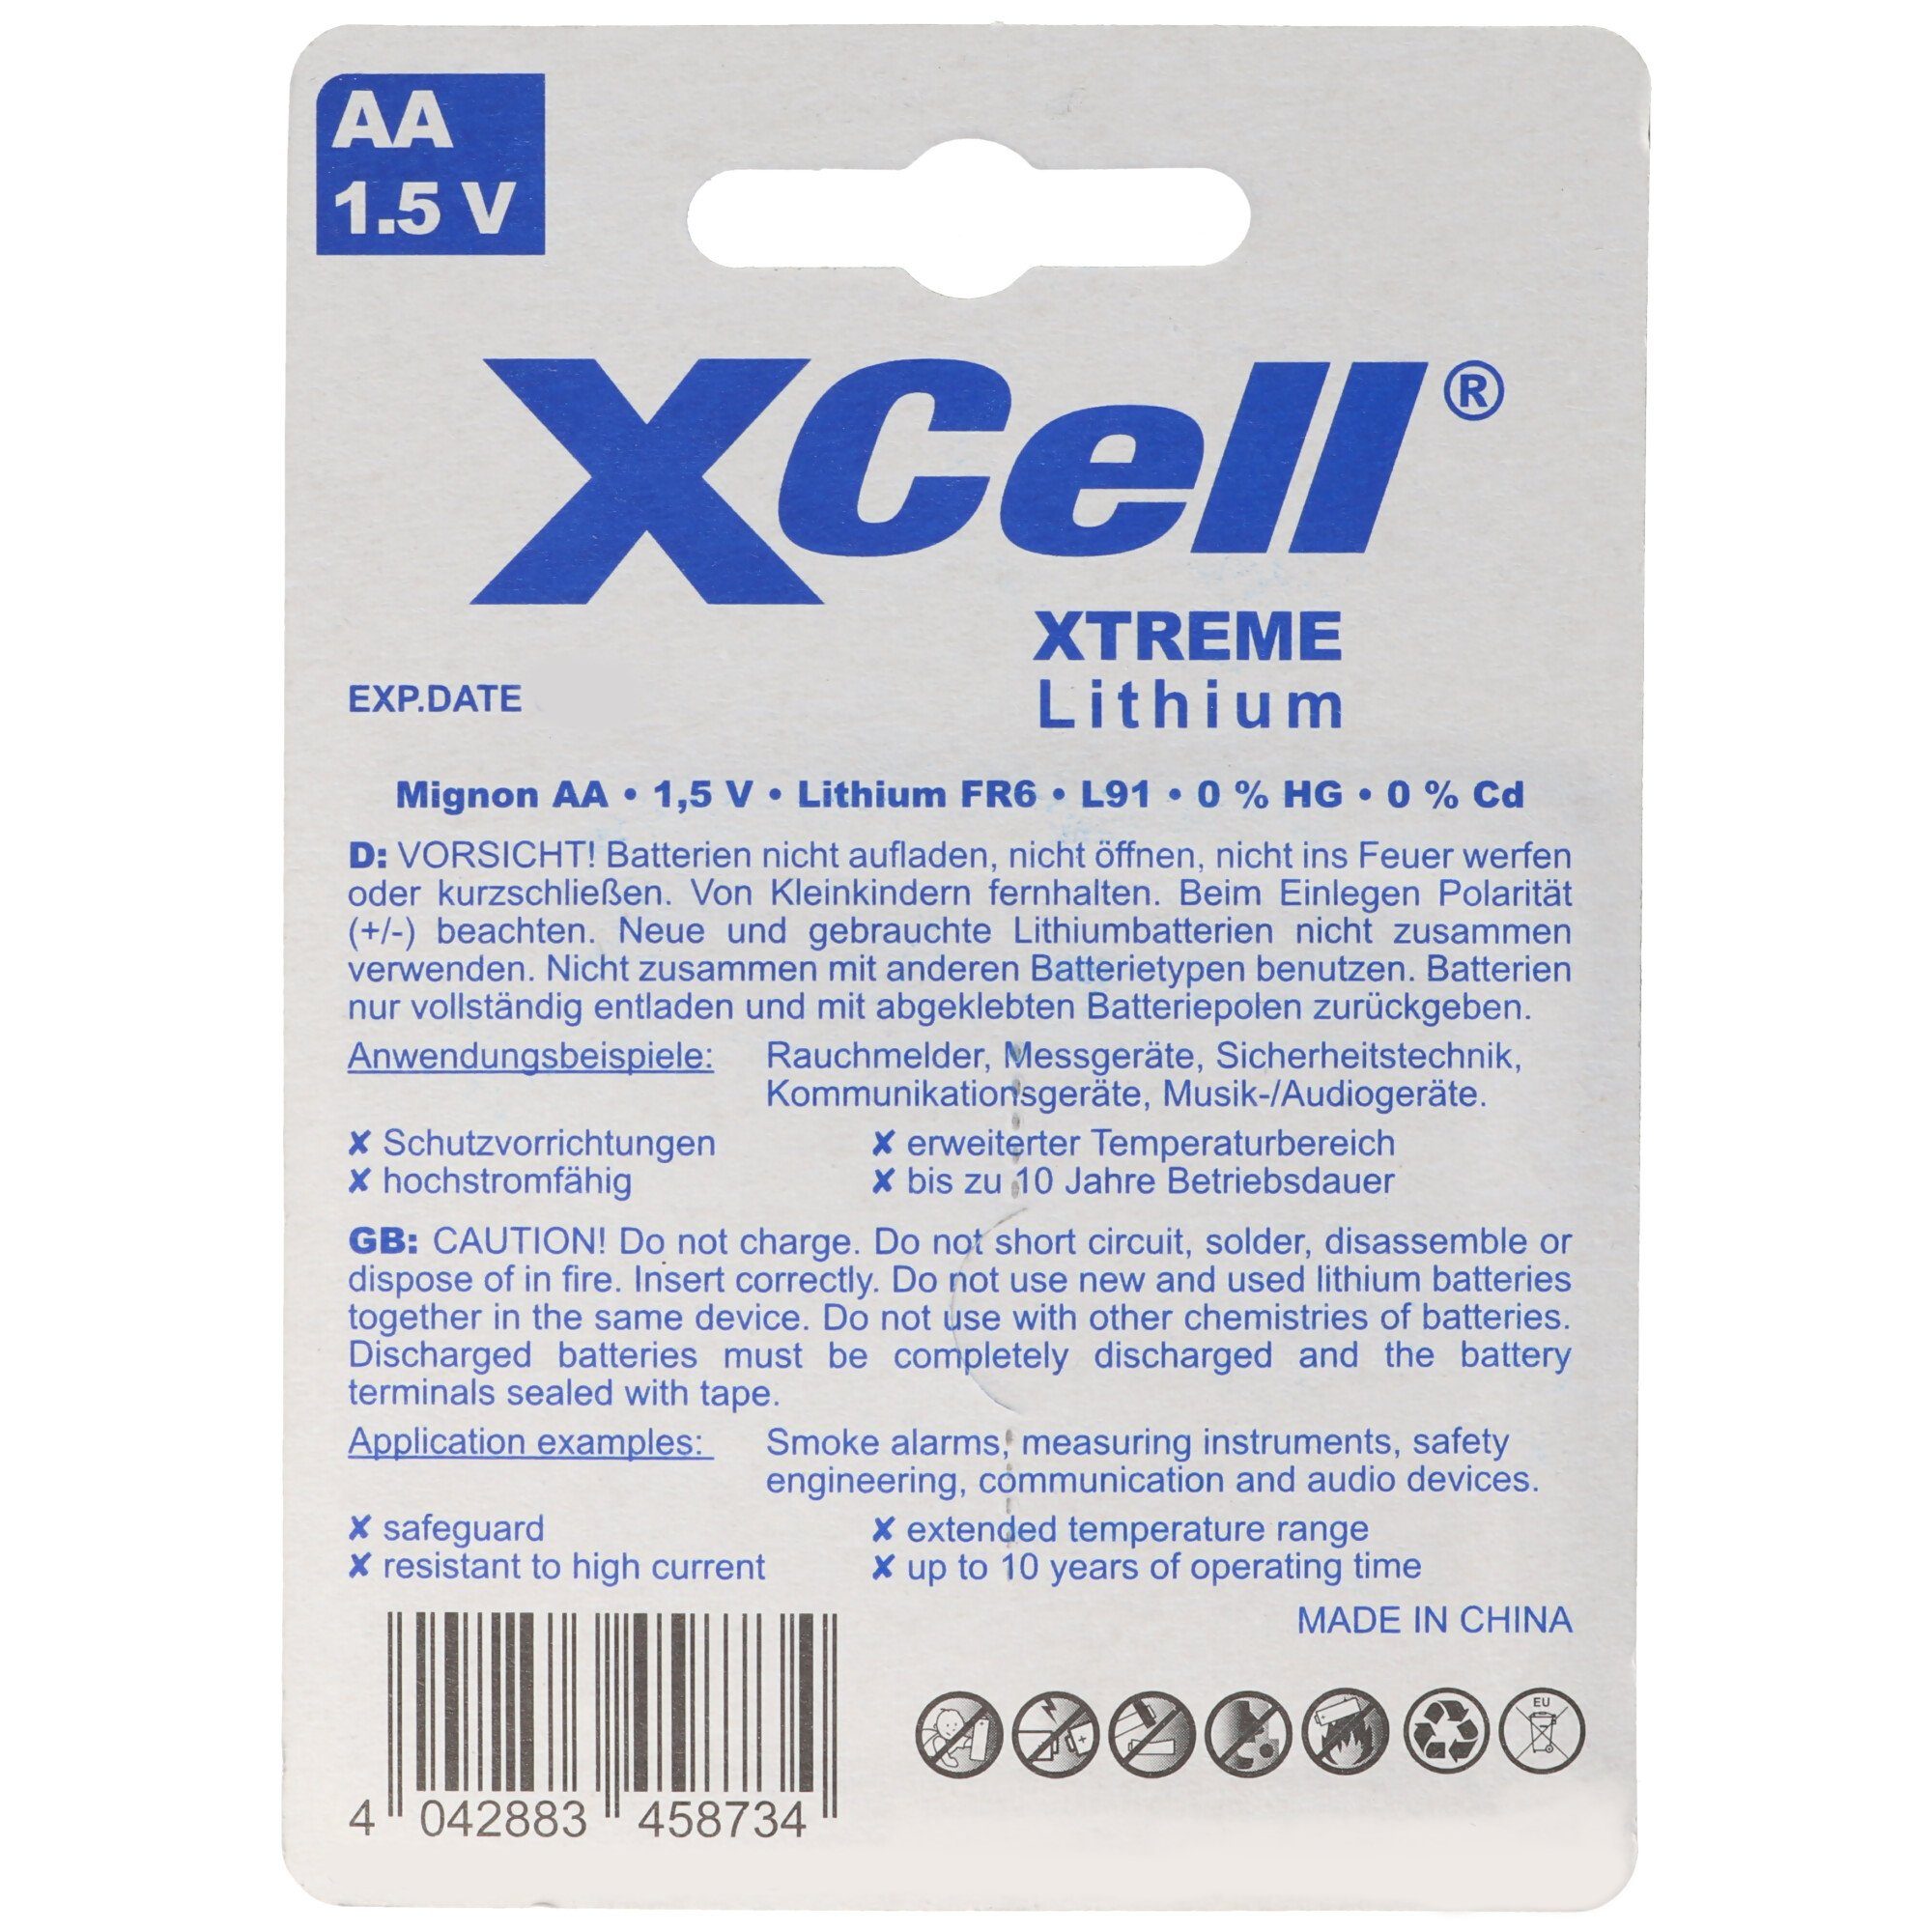 XCell AAA, Micro Lithium XTREME Batterie, (1,5 1,5V 4 V) FR03, Batterie Batterie, Lithium L92